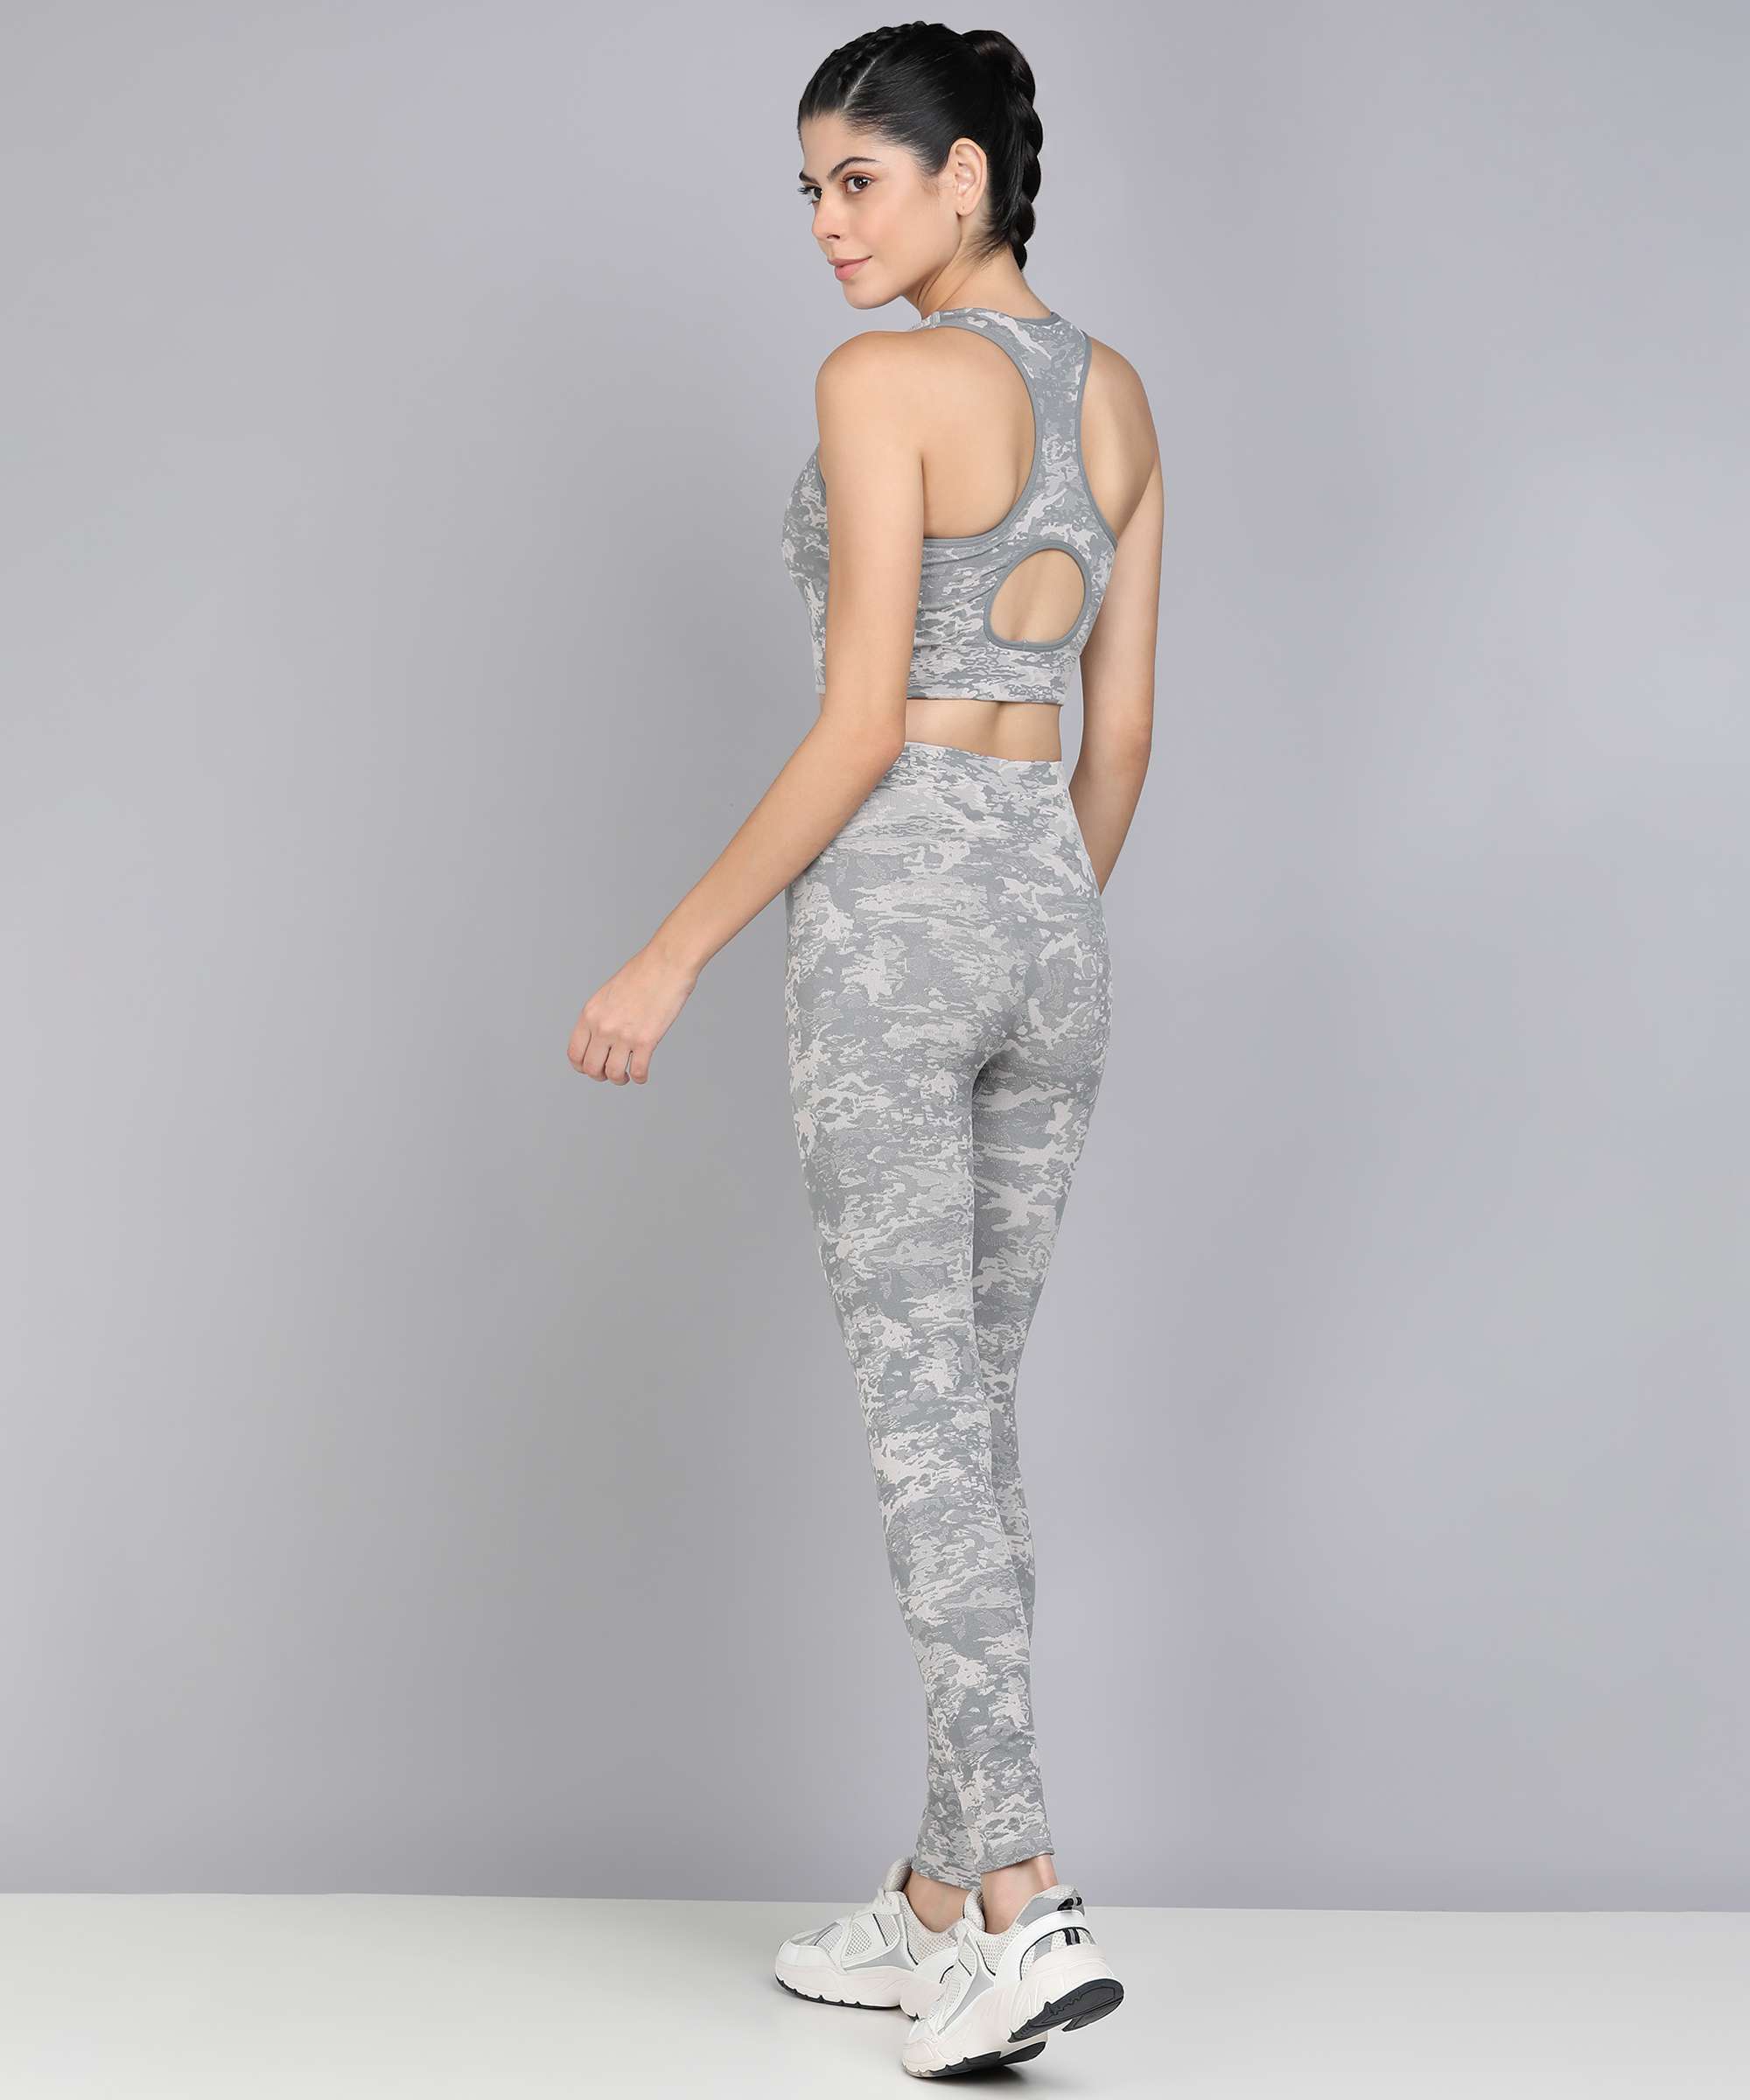 Camo High-Waisted Workout Leggings - Competitor Source